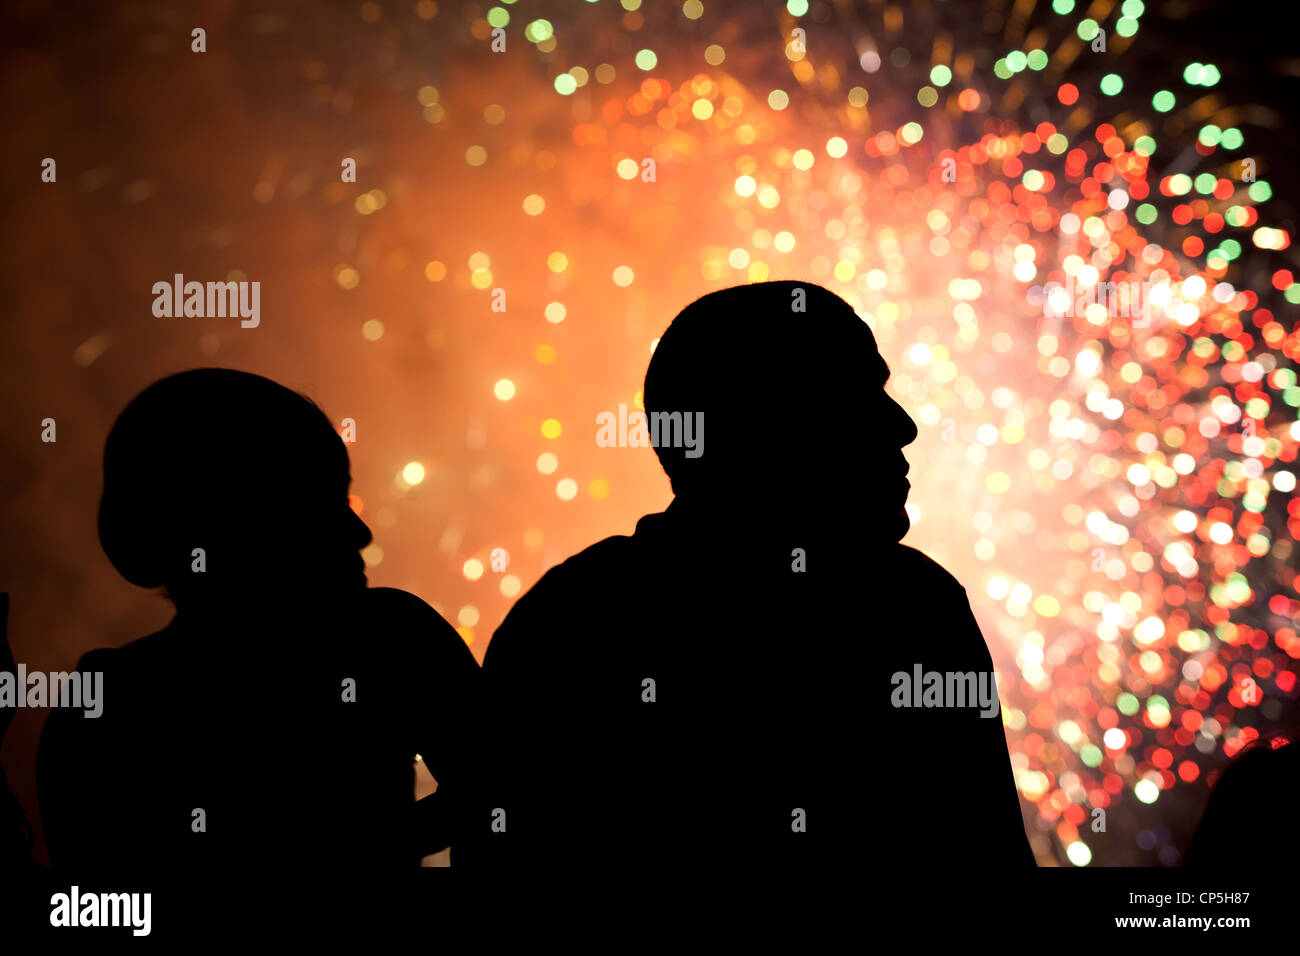 President Barack Obama and First Lady Michelle Obama watch fireworks from the roof of the White House, July 4, 2011. Stock Photo